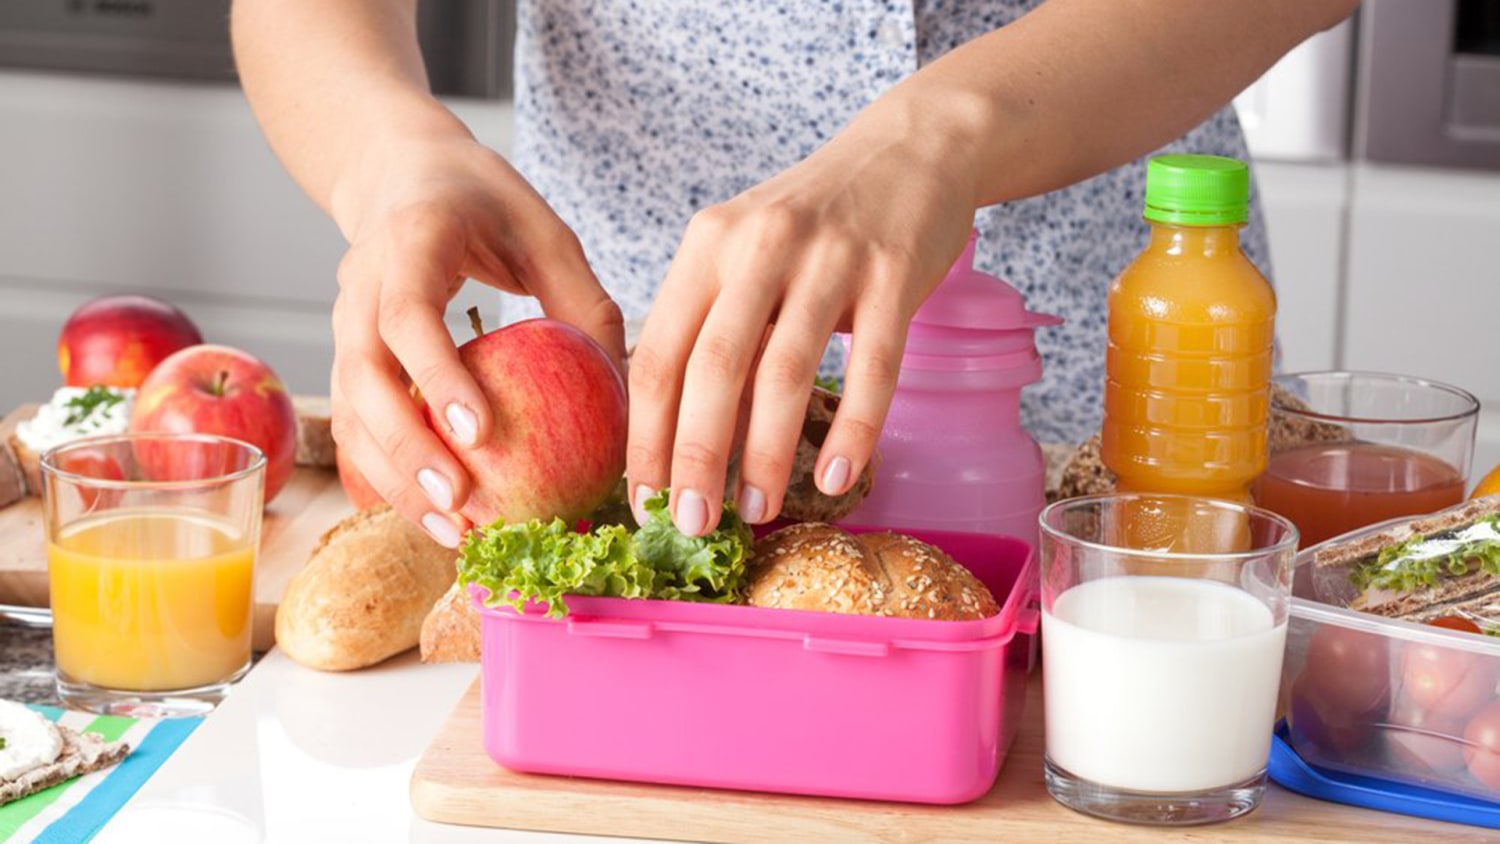 How to keep food hot in your kids' lunch box